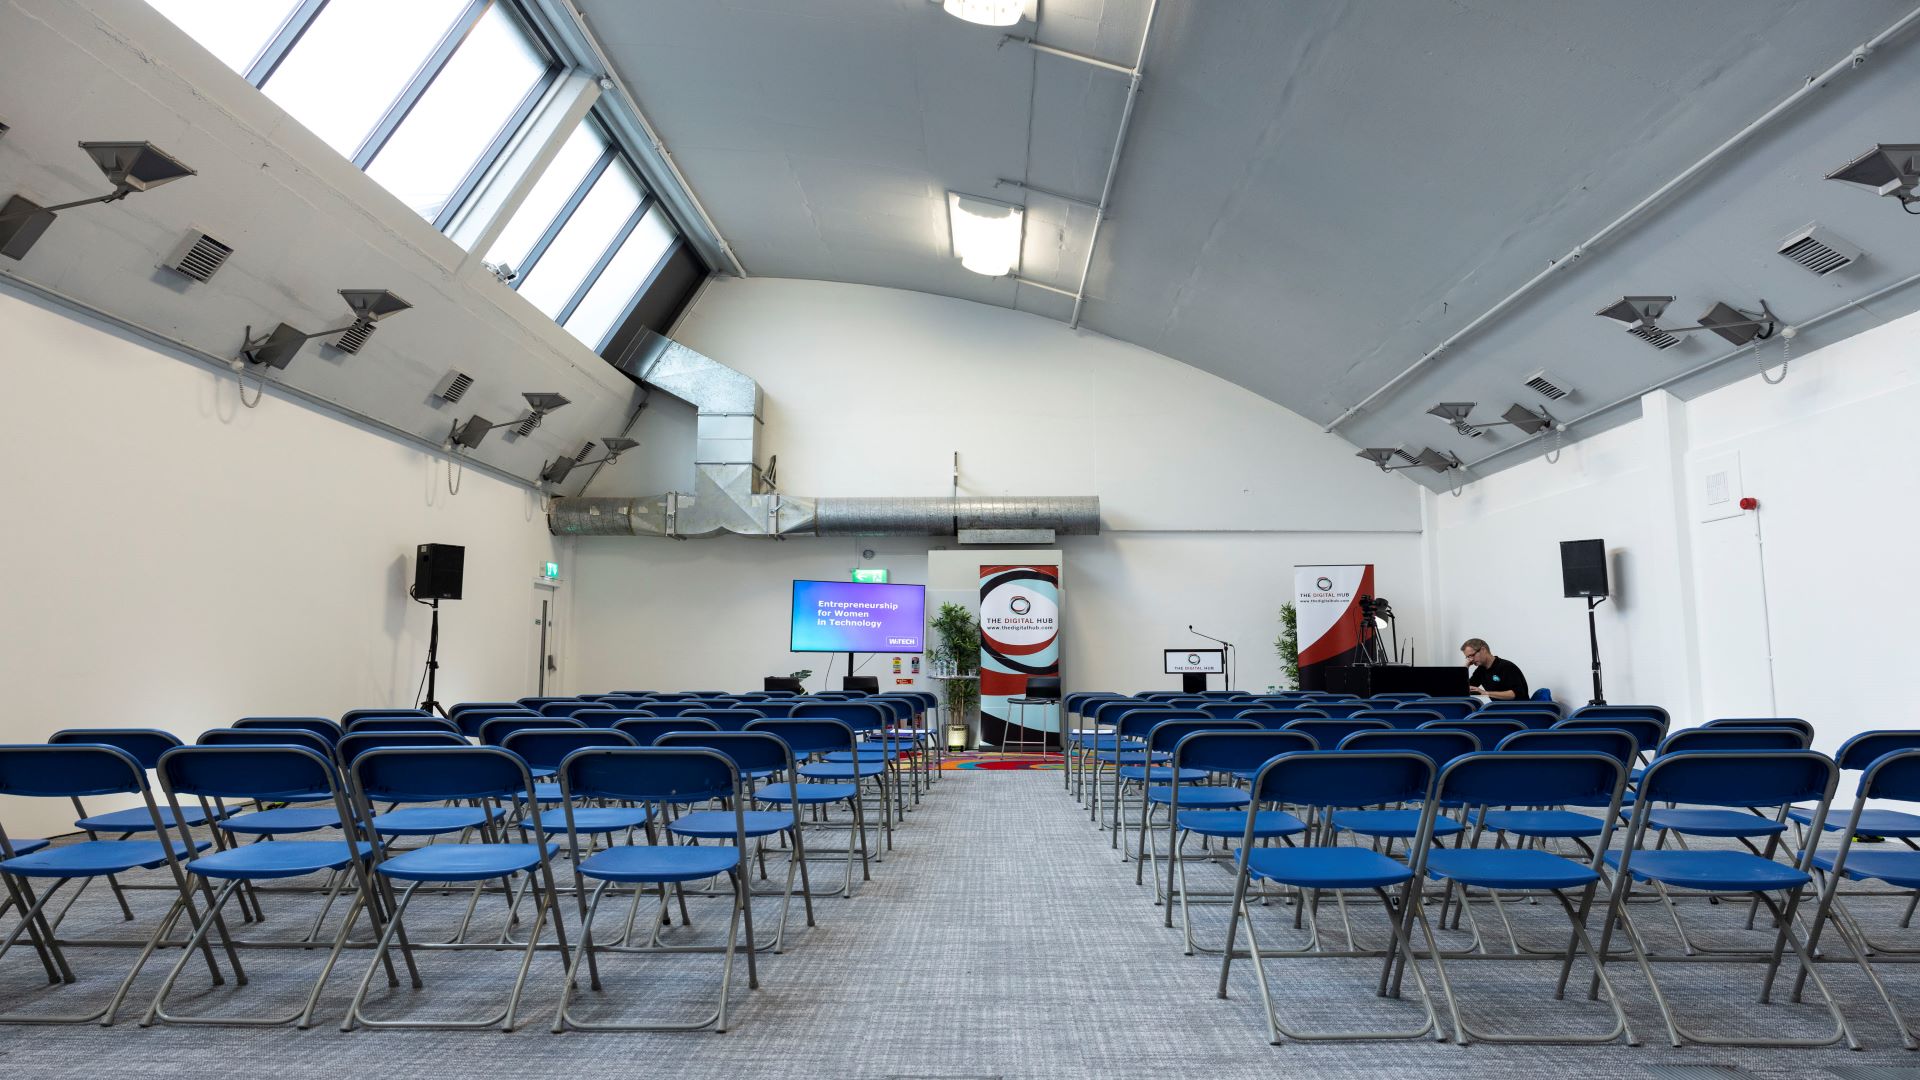 Rows of blue chairs in a meeting room with 'Digital Hub' pullups at the top of the room. There is also a wide screen tv, table and lectern visible. Carpet is grey and bright light comes in from the roof.